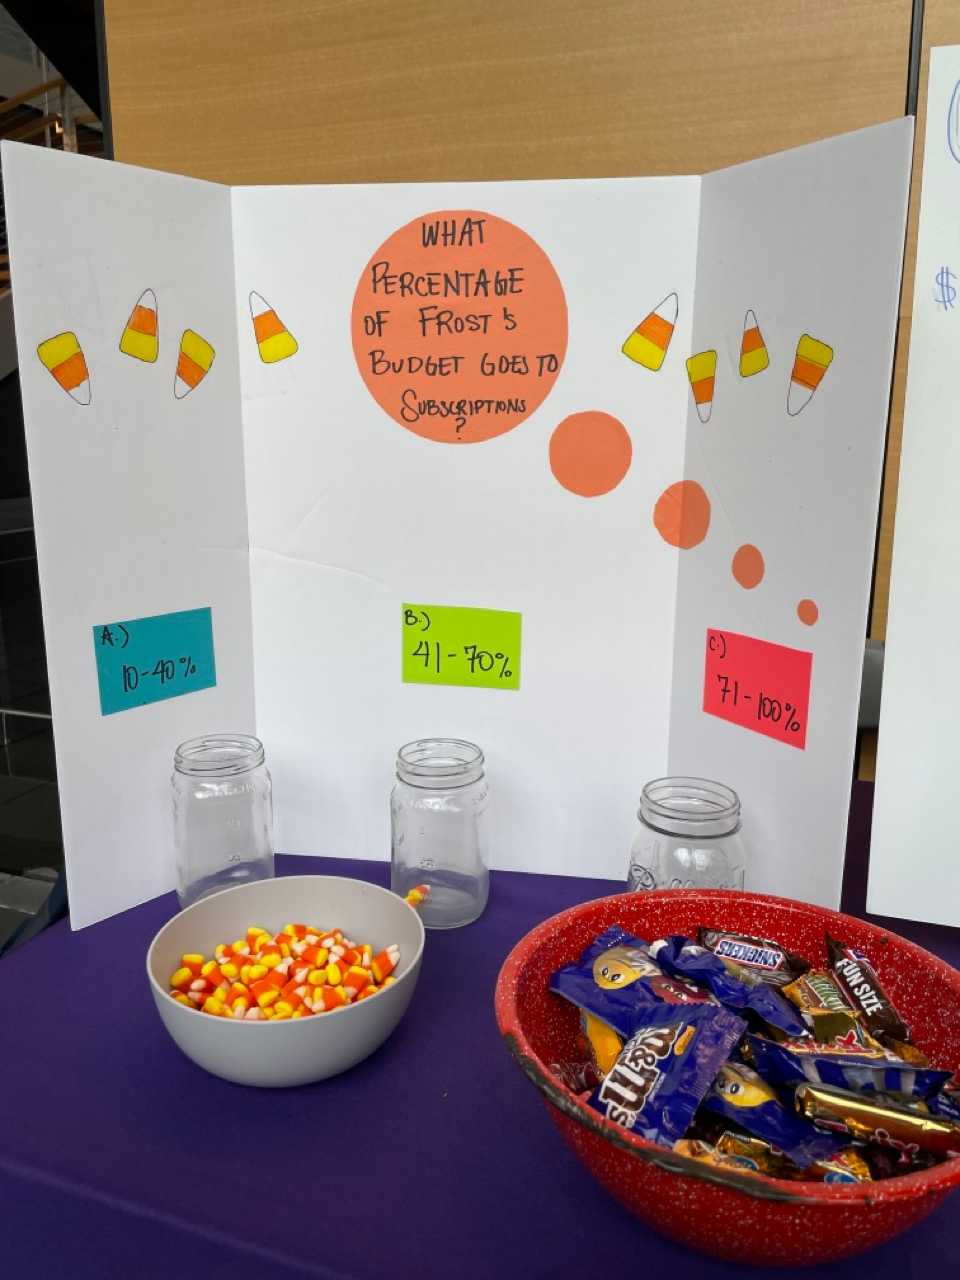 A tri-fold poster with the words What Percentage of Frosts Budget Goes to Subscriptions in an orange circle sits on a purple table with a bowl of candy corn and candy in front of it.